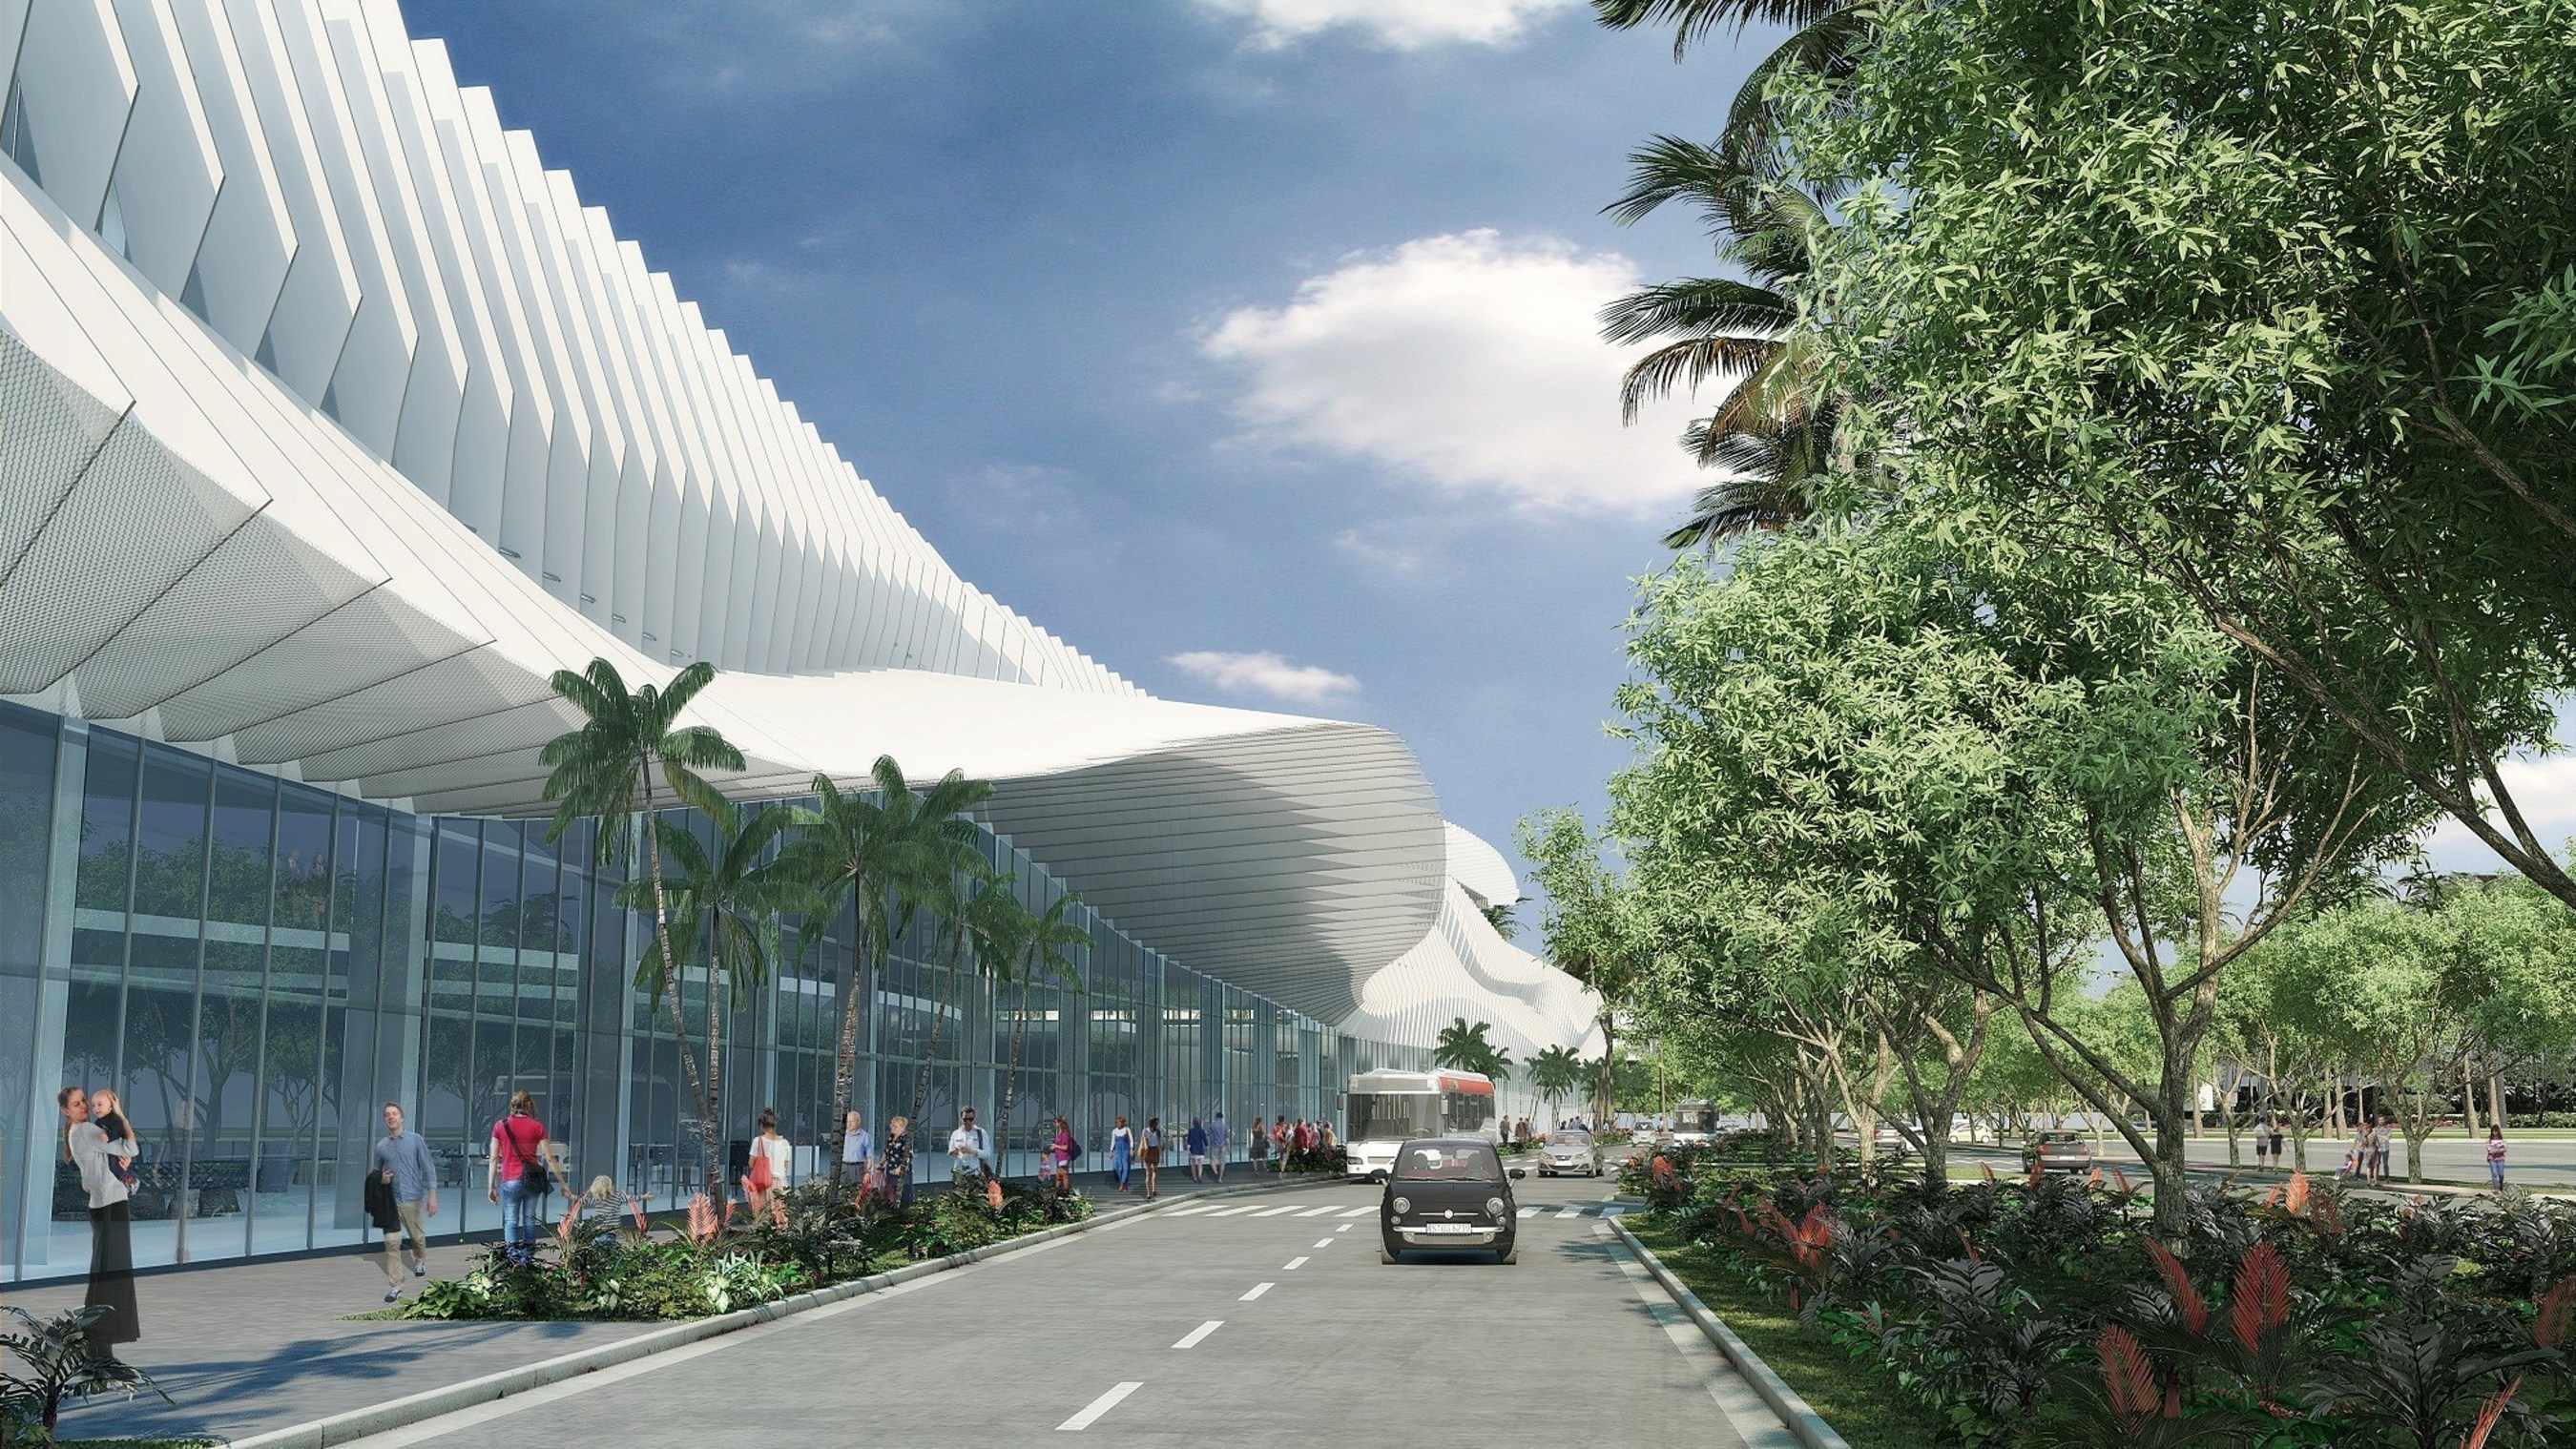 $615 million investment to renovate and expand Miami Beach Convention Center